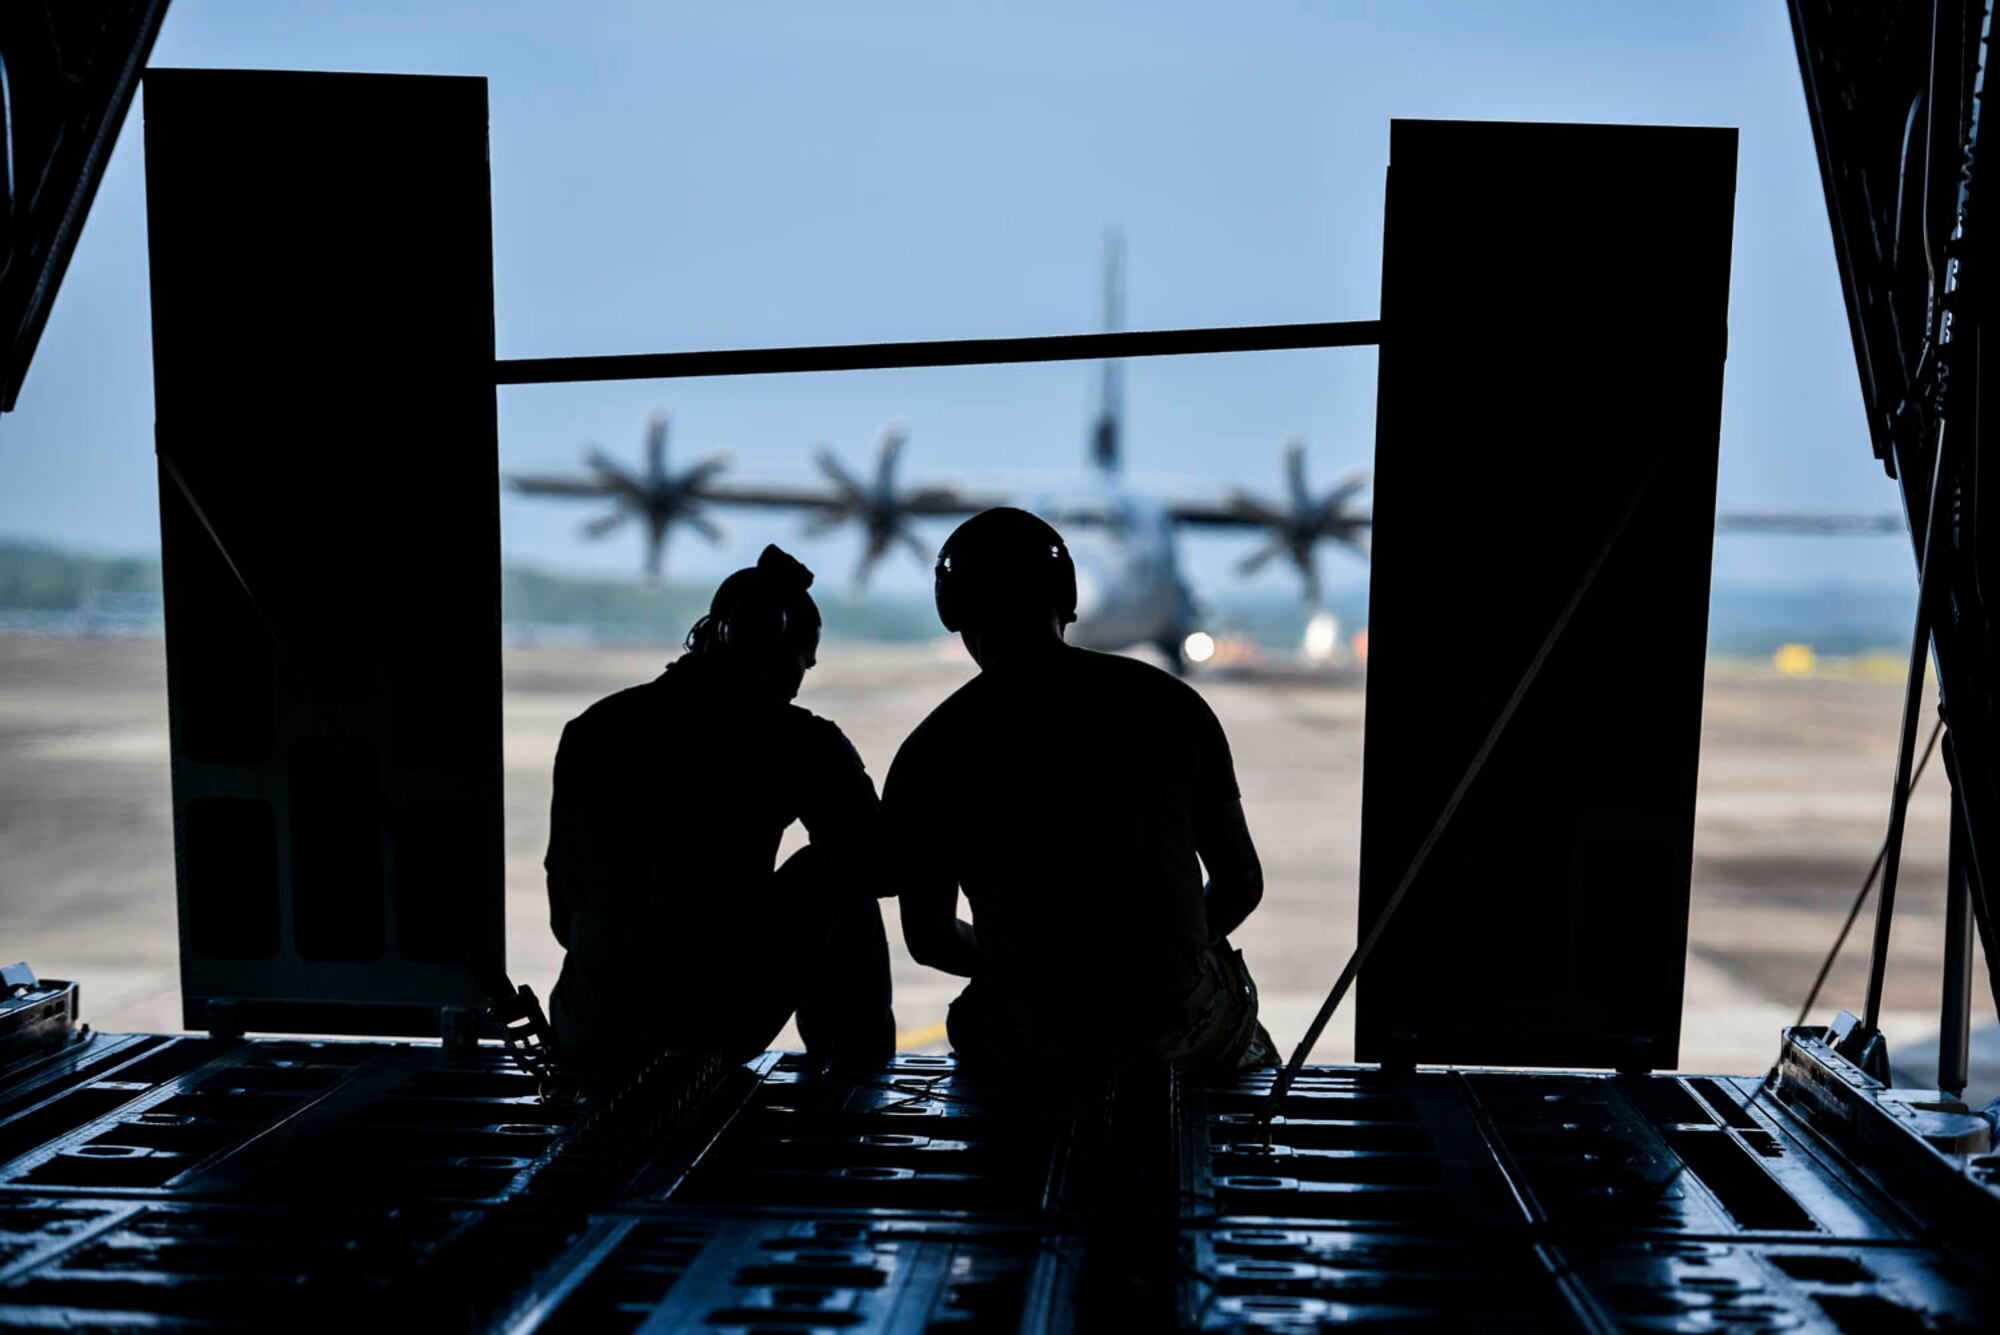 Tech. Sgt. William Mcleod, 327th Airlift Squadron loadmaster, and Staff Sgt. Anthony Miller, 327th Airlift Squadron loadmaster, discuss the plan for the ongoing exercise as the C-130J taxis down the runway during the Turkey Shoot competition August 7, 2019, at Little Rock Air Force Base, Ark. The majority of our Reserve members must meet the same requirements of Active Duty personnel. This requires balancing a fulltime civilian job or college studies while maintaining their military readiness. Mission success depends on Airmen resiliency and their ability to overcome adversity. (U.S. Air Force Reserve photo by Senior Airman Nathan Byrnes)